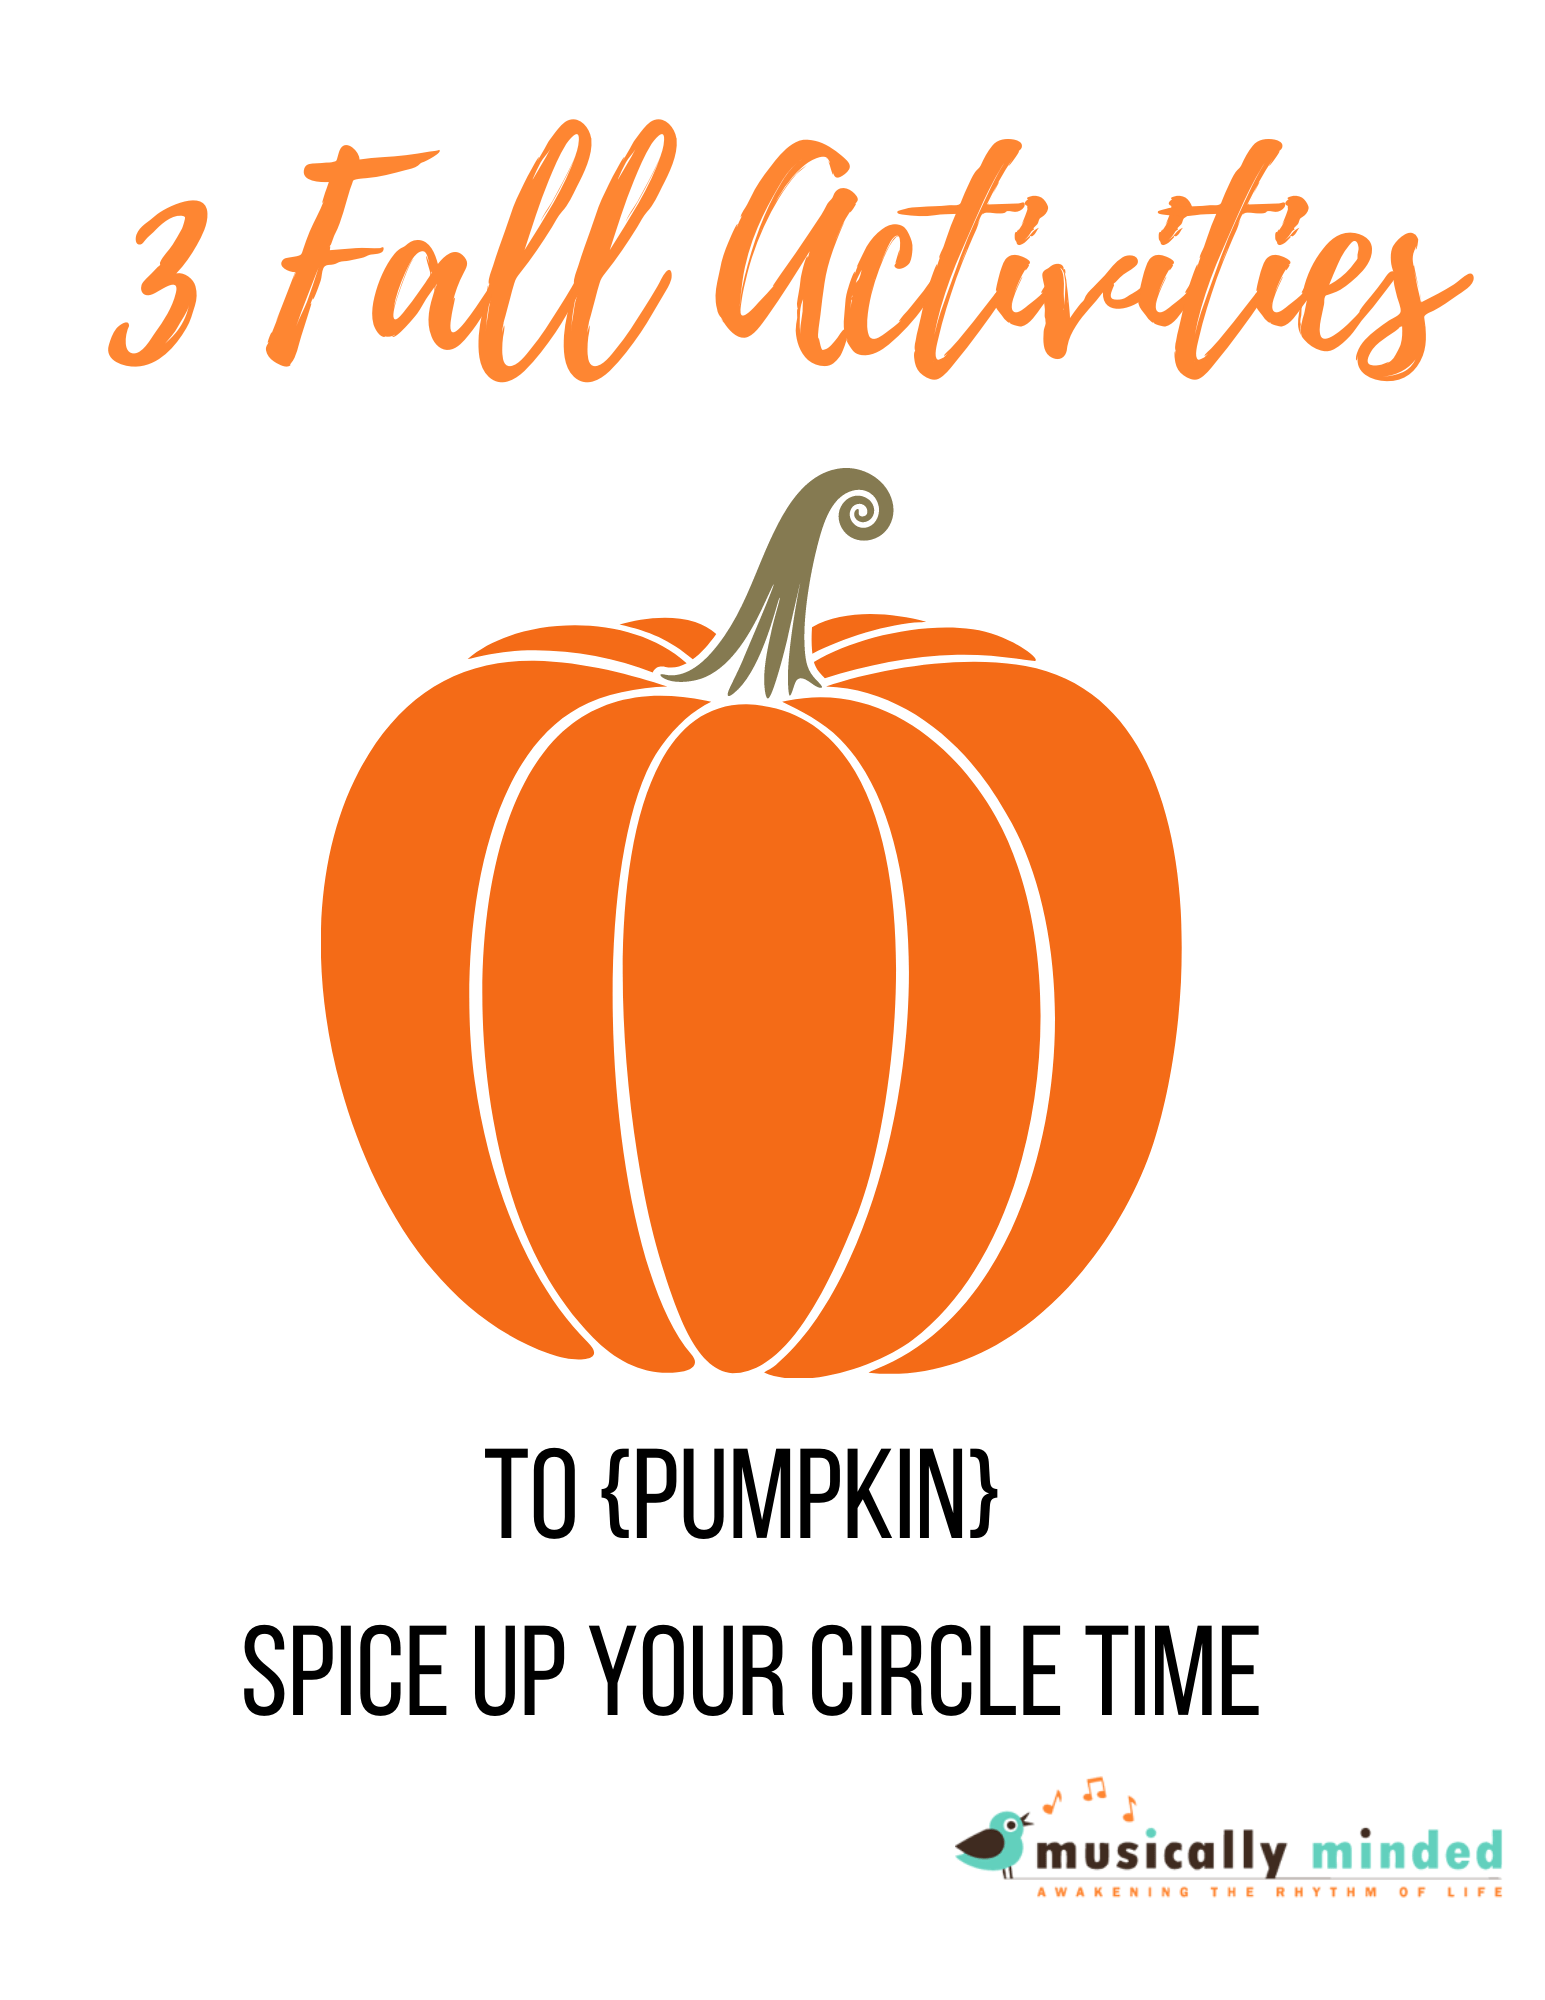 3 fall activities to (pumpkin) spice up your circle time.